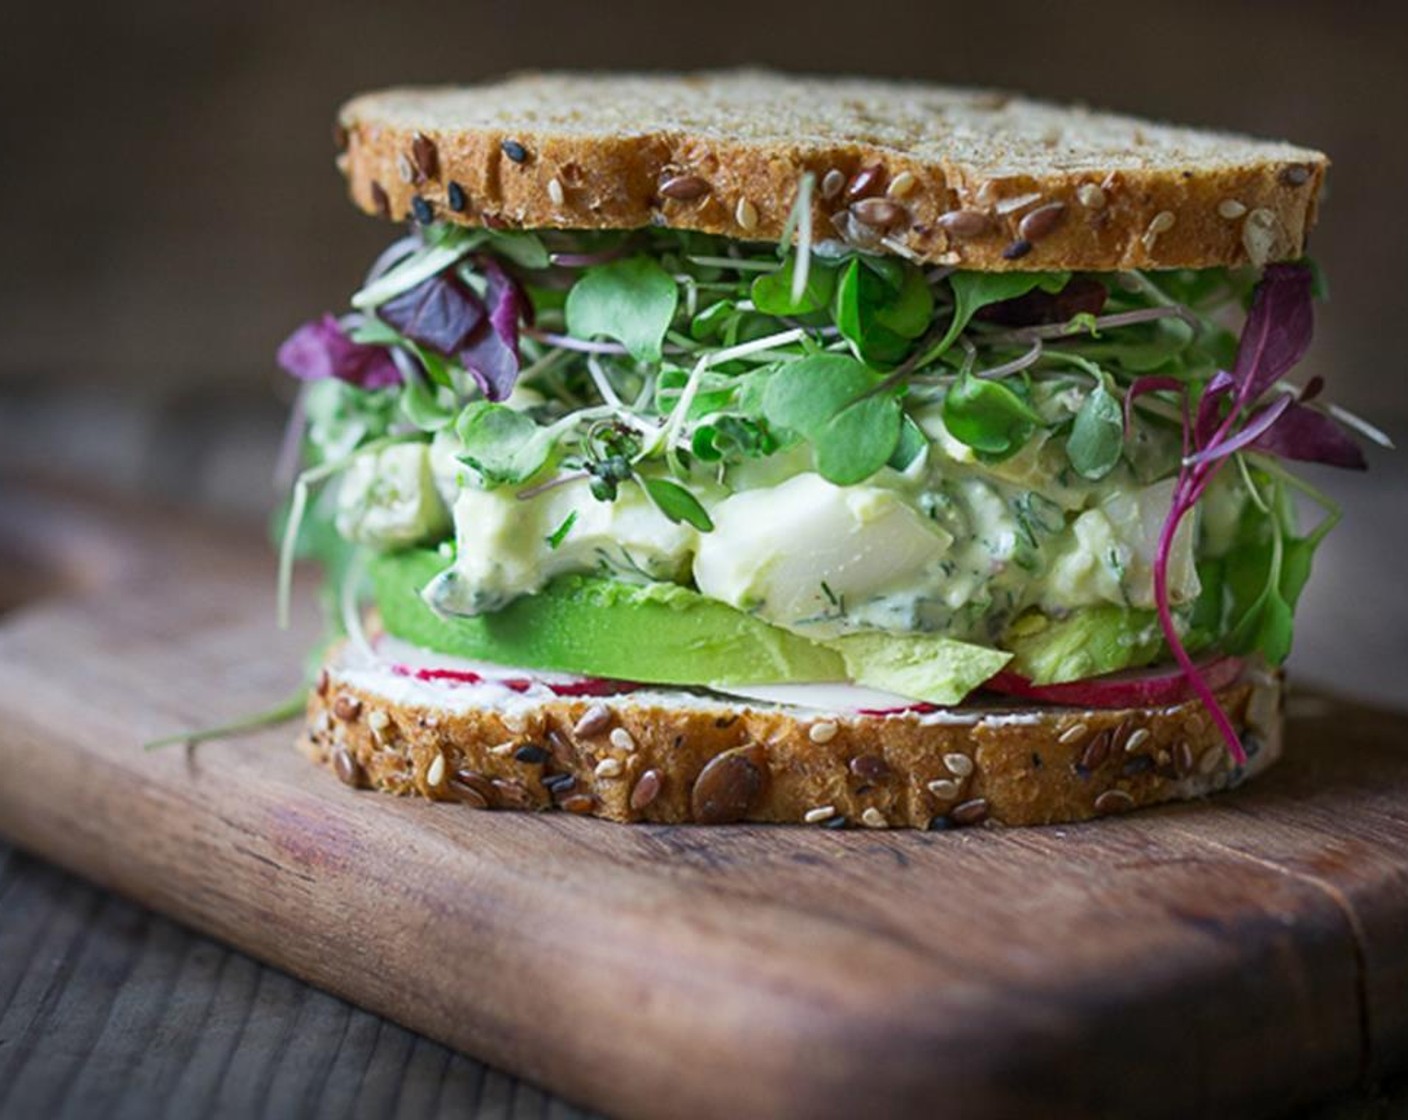 step 7 Top with a generous amount of egg salad, and a mound of micro greens. Either serve openfaced or top with second slice of Bread (8 slices). Cut in half diagonally. Enjoy!!